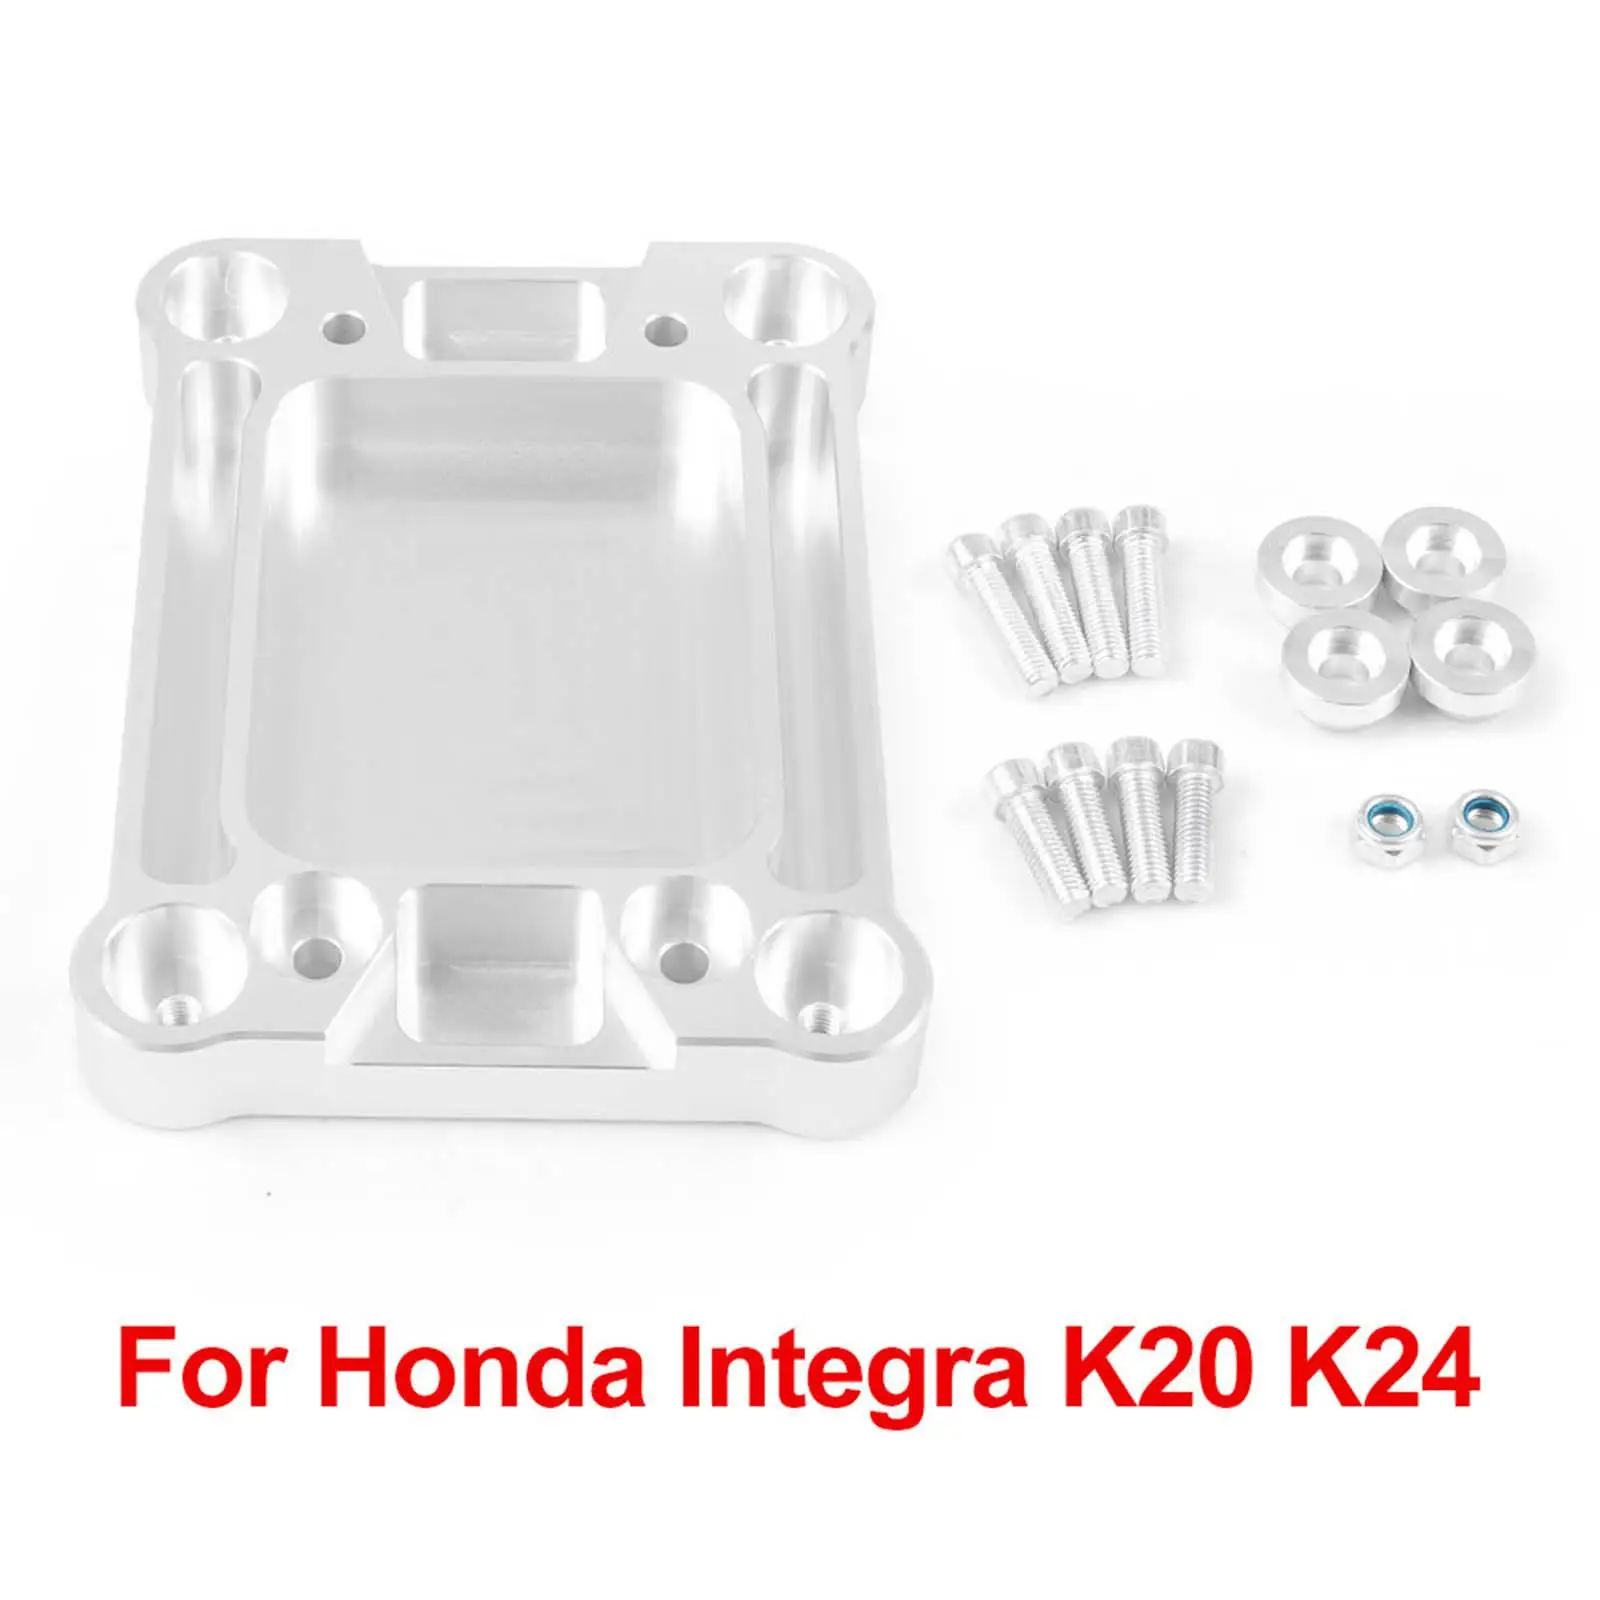 Shifter Box Base Plate Replaces Auto Parts Aluminum Accessories Fit for Honda Civic 1988-2000 RSX Engine K20 K24 K Series